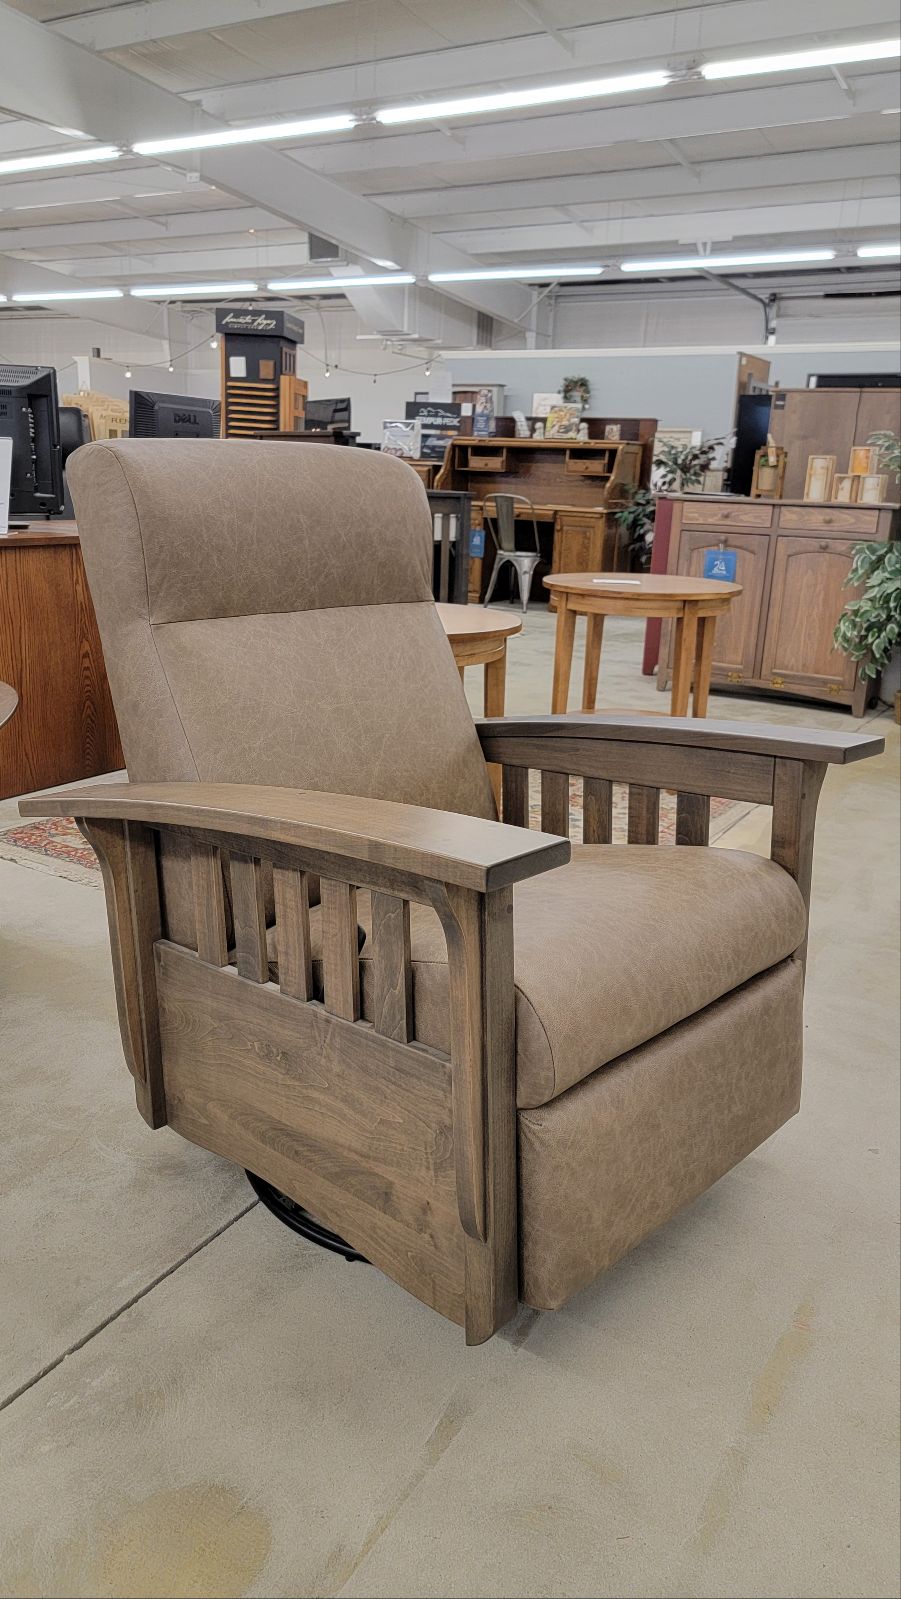 Amish Mission Swivel Recliner - snyders.furniture